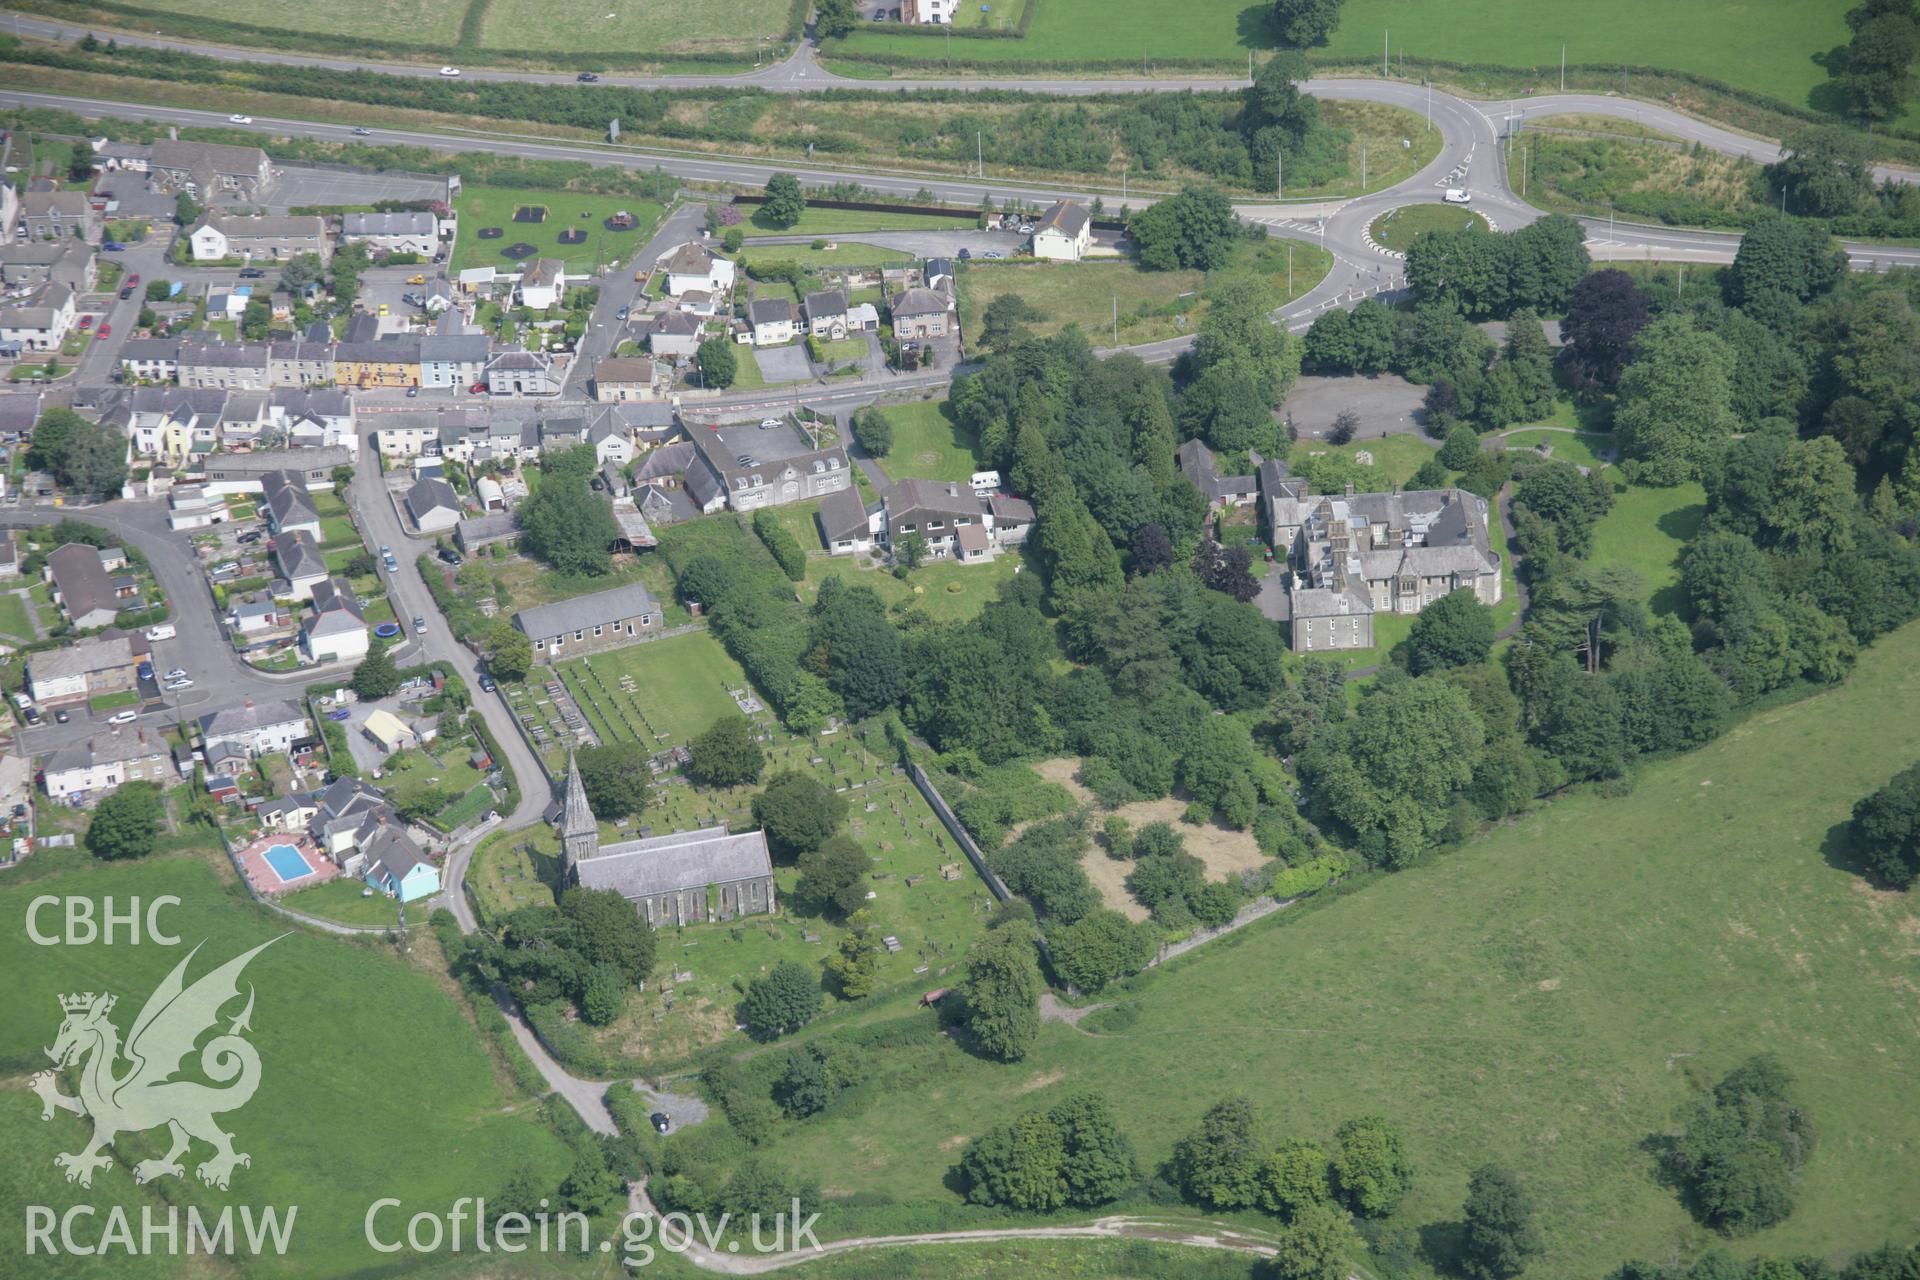 RCAHMW colour oblique aerial photograph of the College of Saints Maurice & Thomas, Abergwili, later The Bishop's Palace, and now Carmarthenshire Museum. Viewed from the south. Taken on 11 July 2005 by Toby Driver